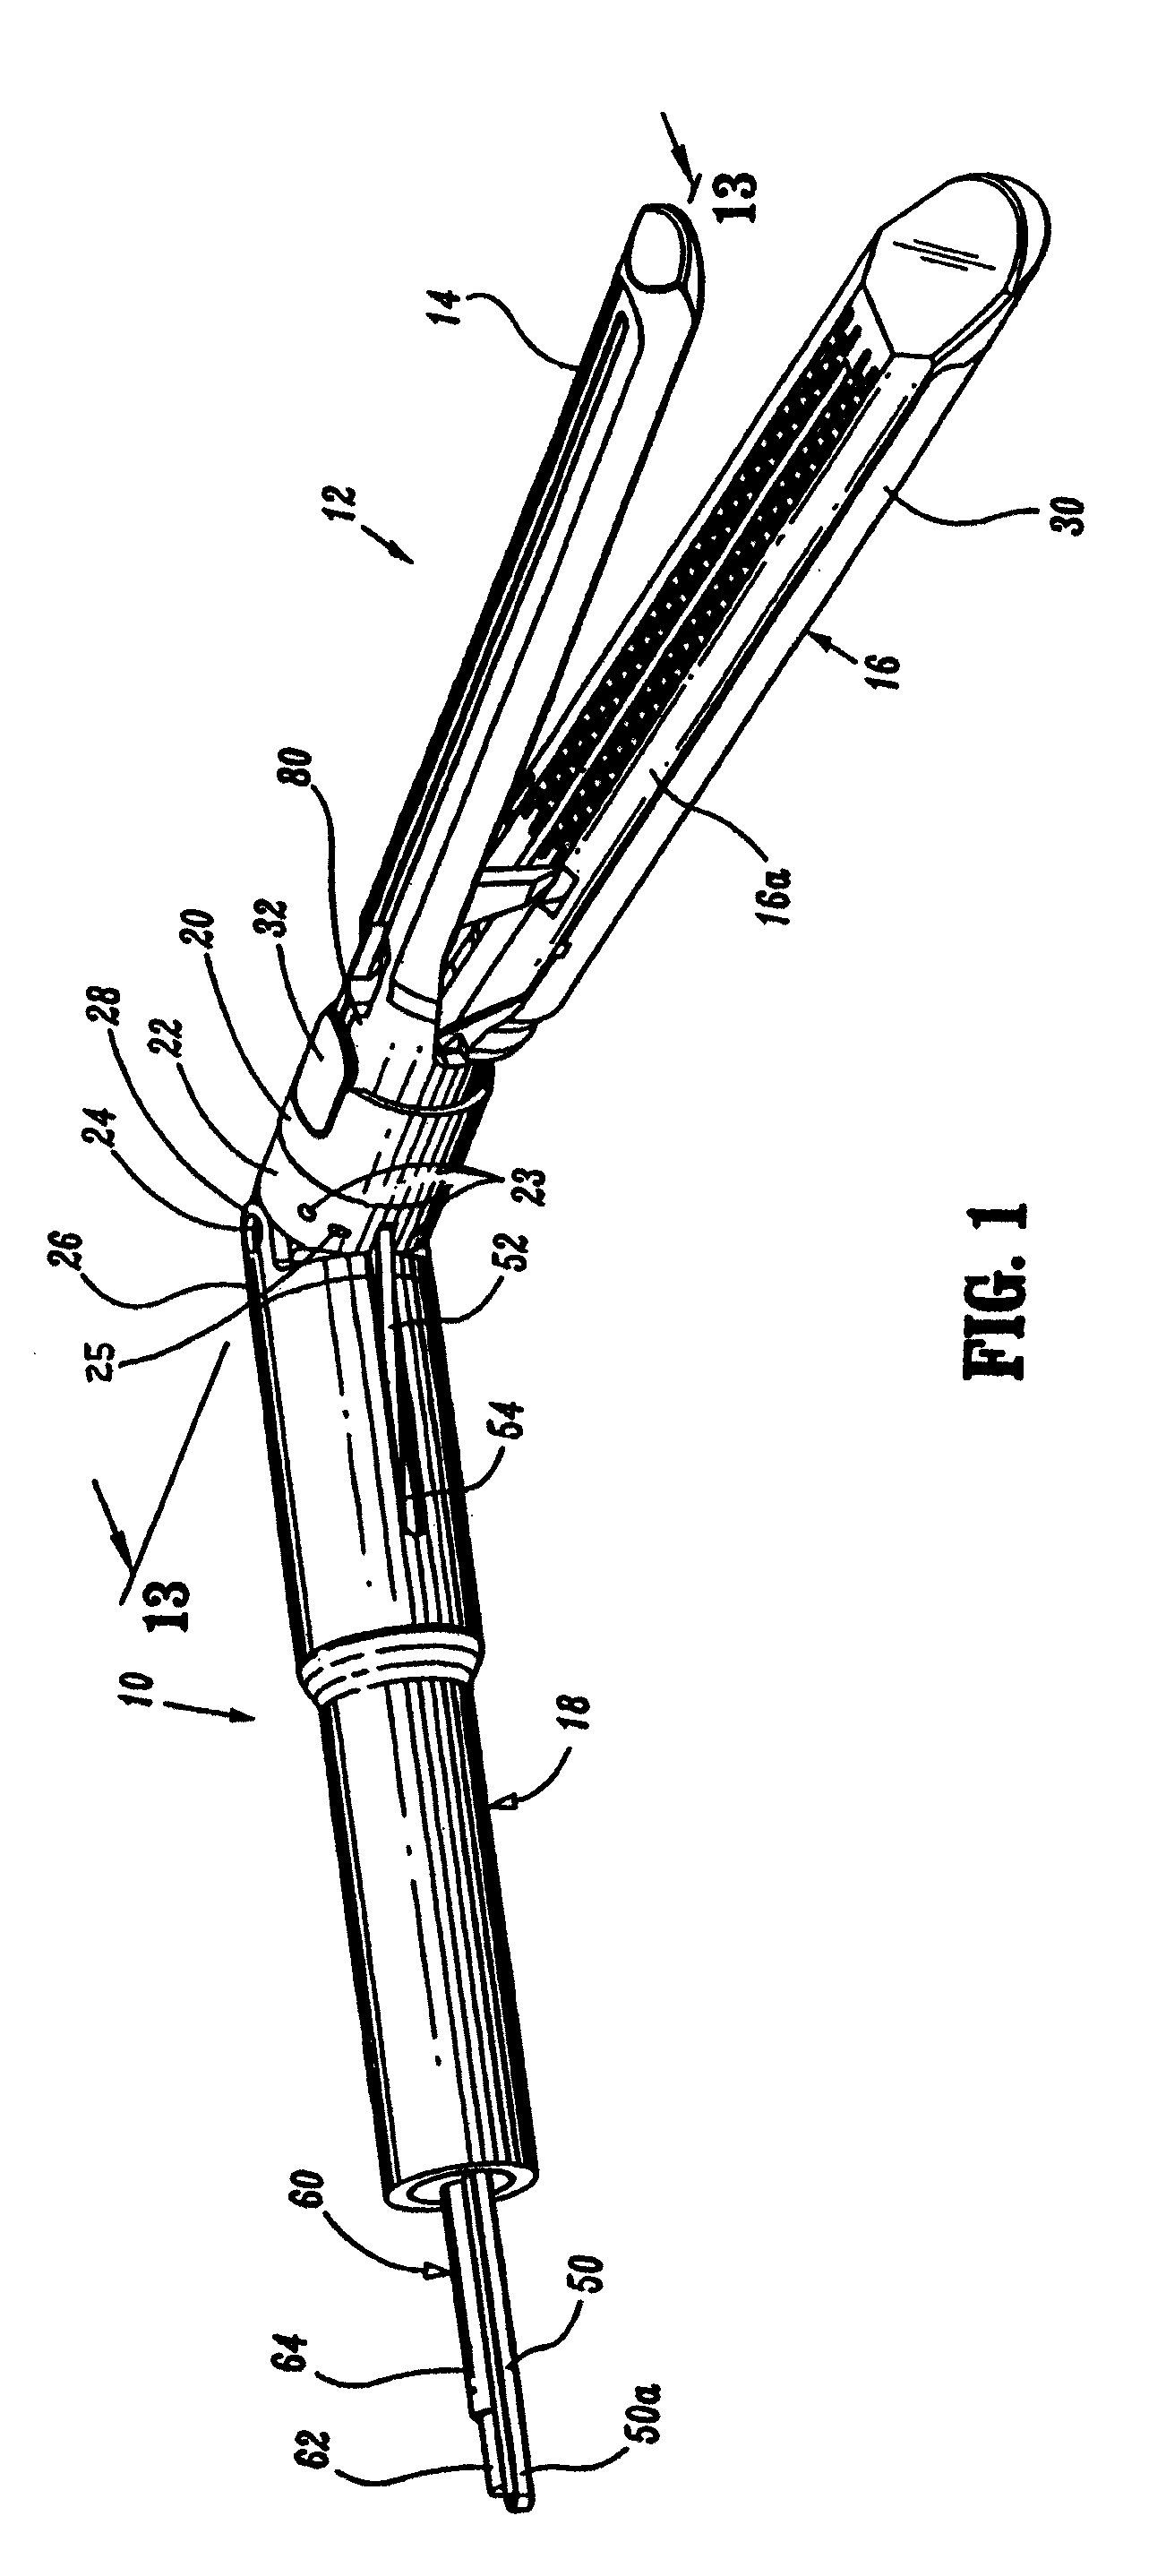 Cartridge assembly for a surgical stapling device